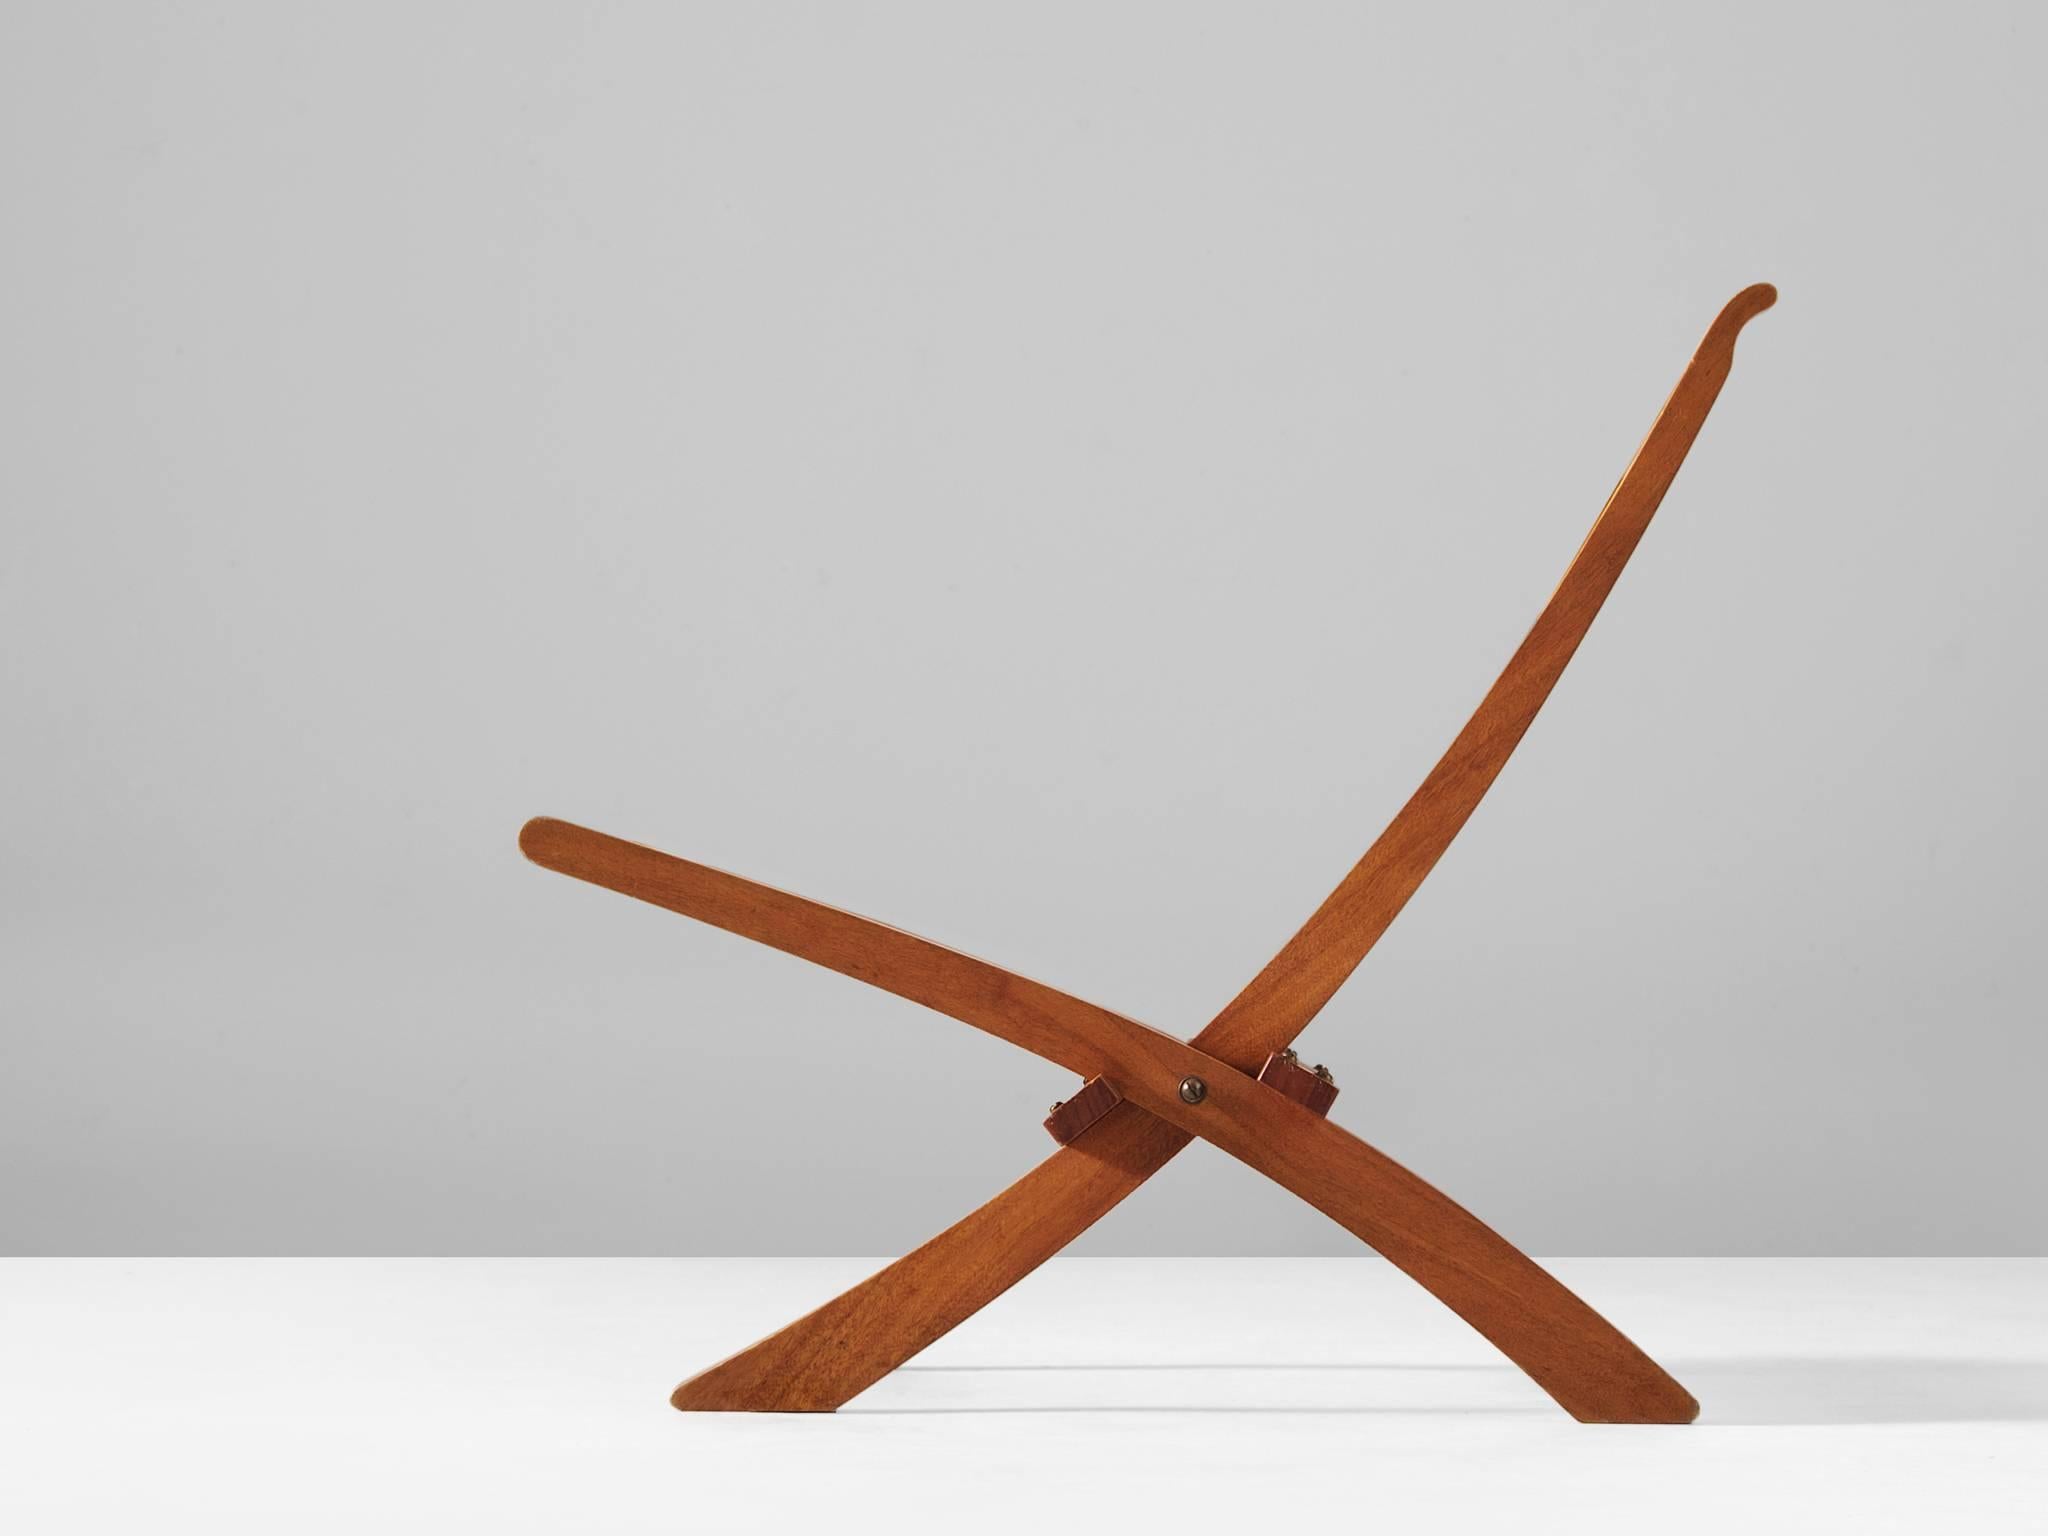 Folding chair, in mahogany, by Hans Wegner for Johannes Hansen, Denmark 1962

Rare folding chair by Danish designer Hans J. Wegner. This lattice chair, made from mahogany shows some elegant lines. The X-shaped frame is wide at the legs and narrows